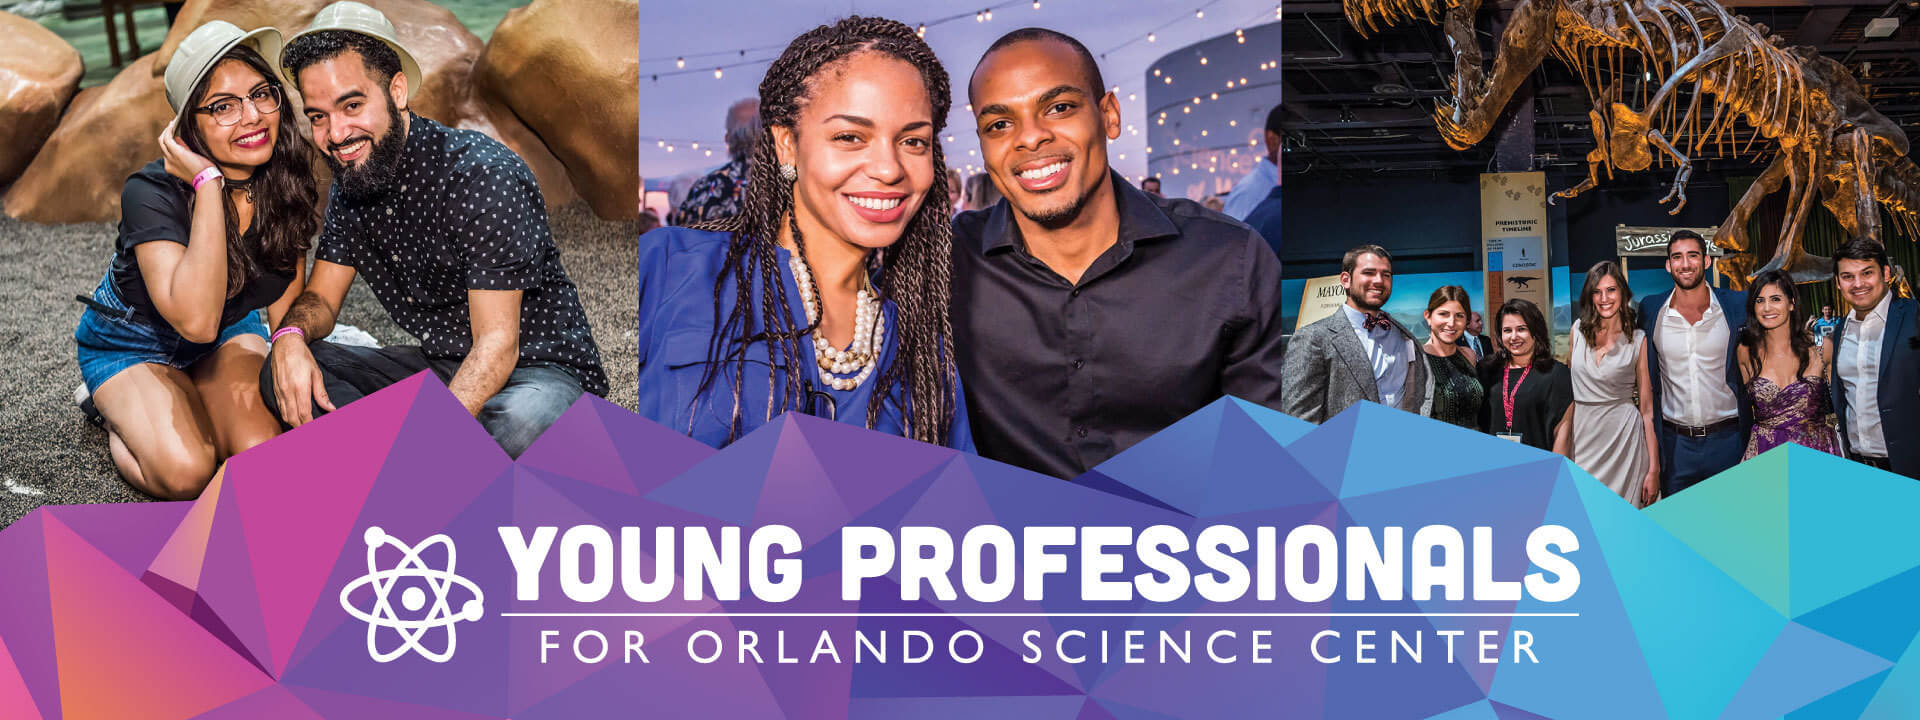 Collage of photos of young adults enjoying Orlando Science Center experiences through Young Professionals for OSC events.